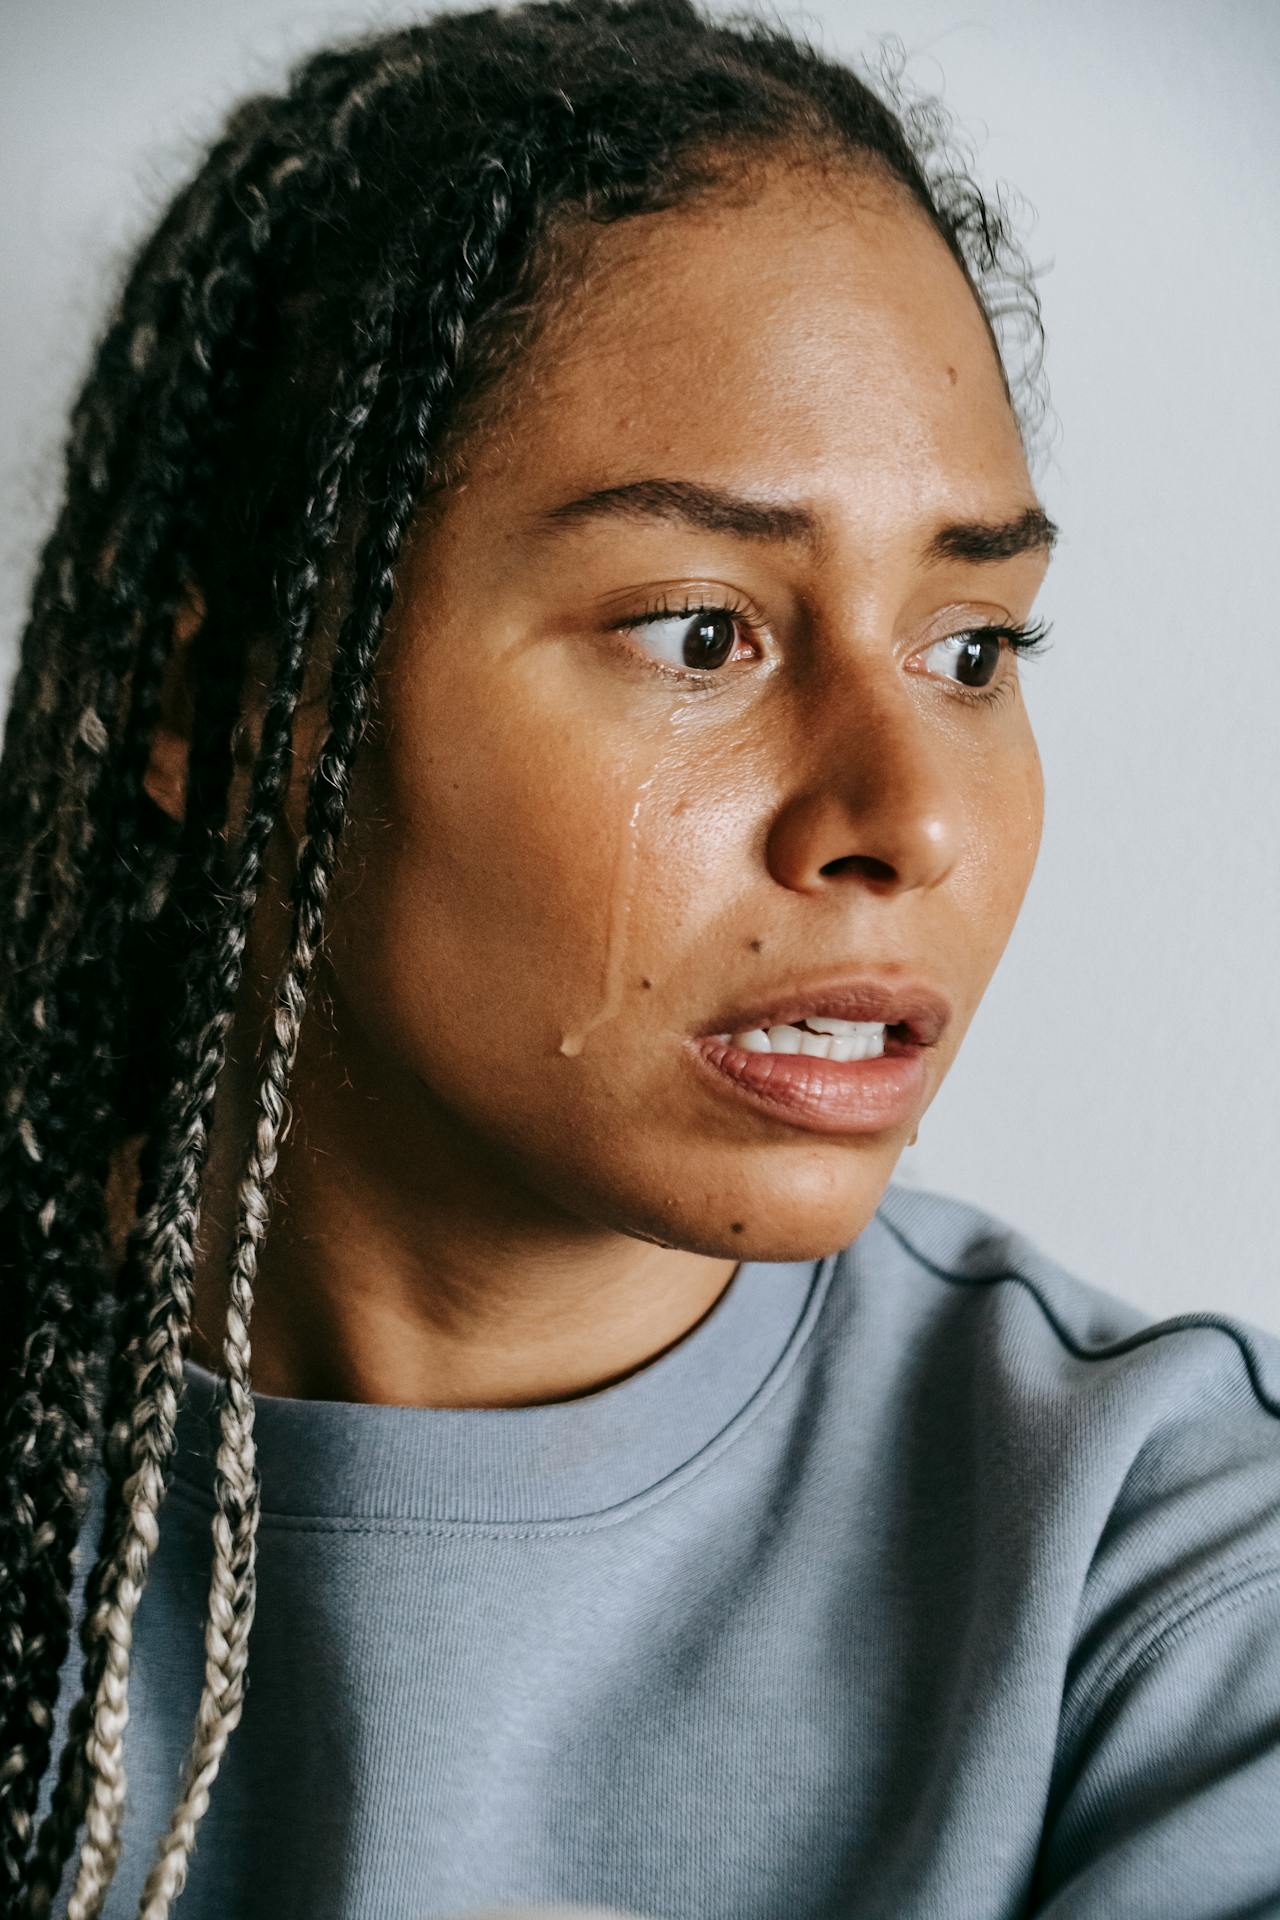 Stock photo of Black woman with long braids, photographed from shoulders up. She is wearing a gray sweatshirt and looking away from the camera, tears running down her face.